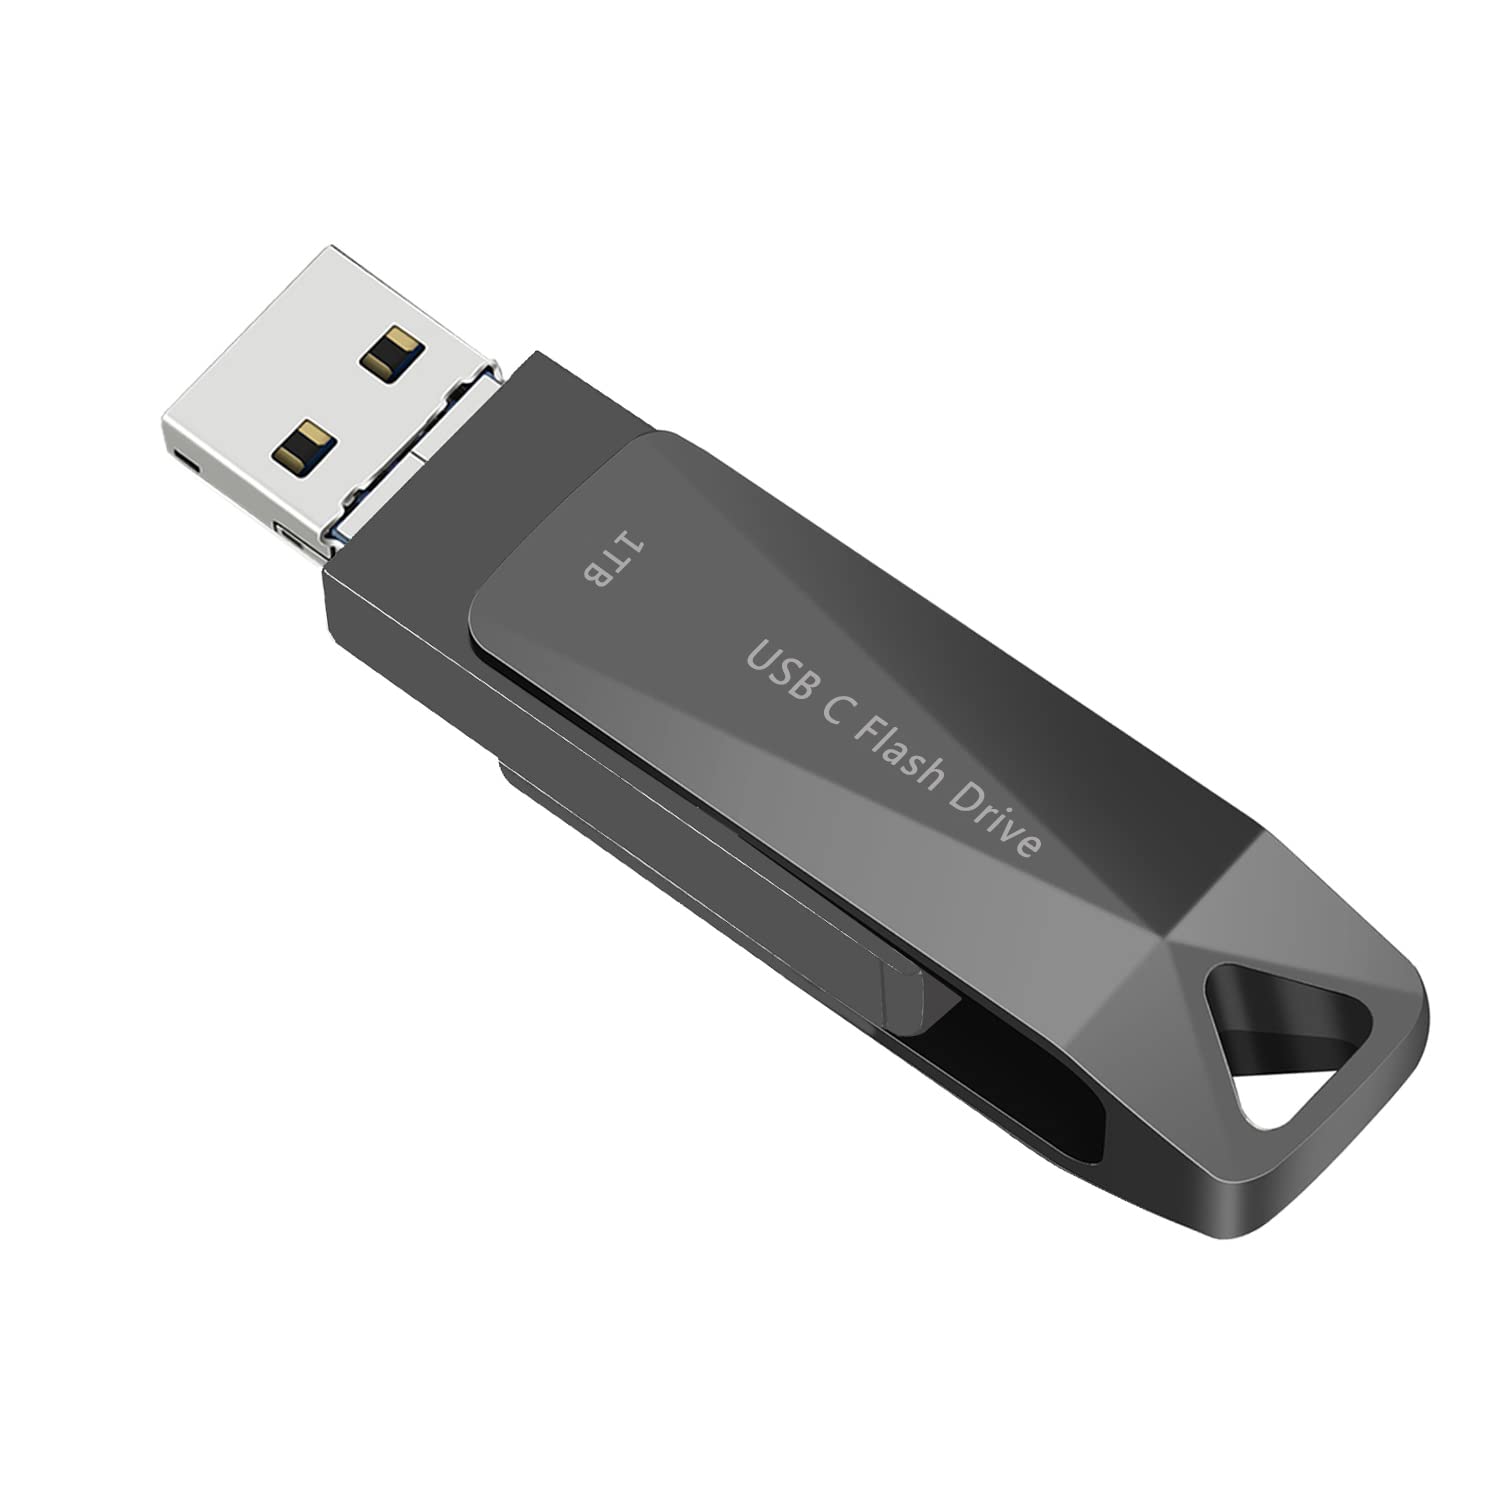 USB C 1TB Flash Drive Memory Stick The Photo Stick for Android Phone Thumb Drive 1TB USB 3.1 Data Storage Drive WANSISEN for MacBook Pad Pro Android Phone USB C Computers and Tablets 1TB ZS Black…